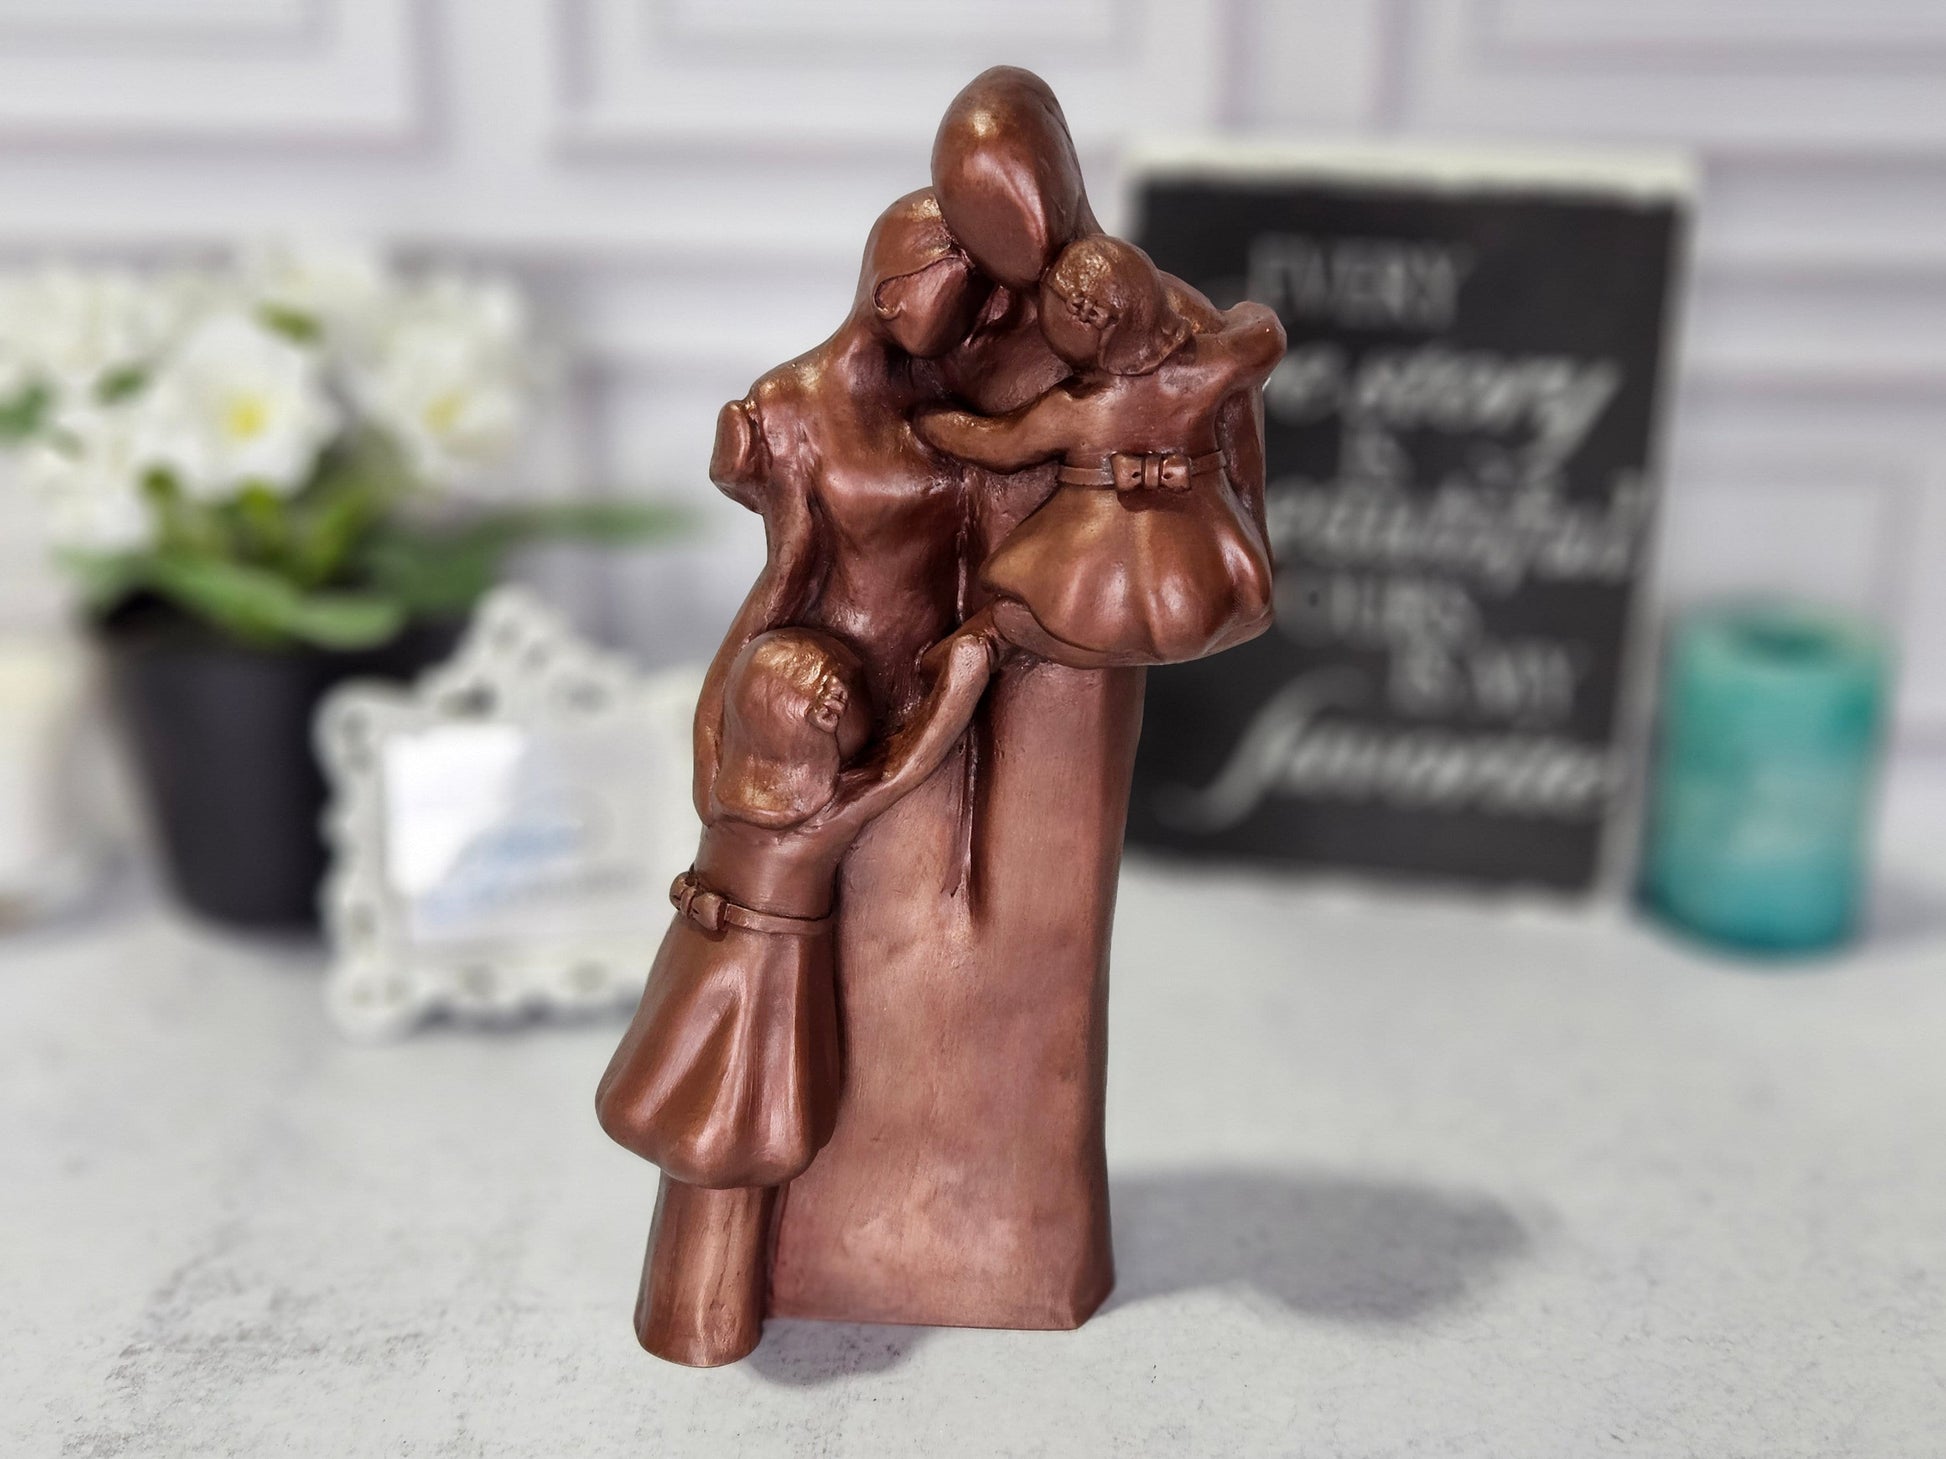 7th Anniversary Family of Four Portrait with a Toddler and a Child Sculptur, Copper Anniversary Gift, 7 Year Anniversary Gift, Copper 9FO4TC